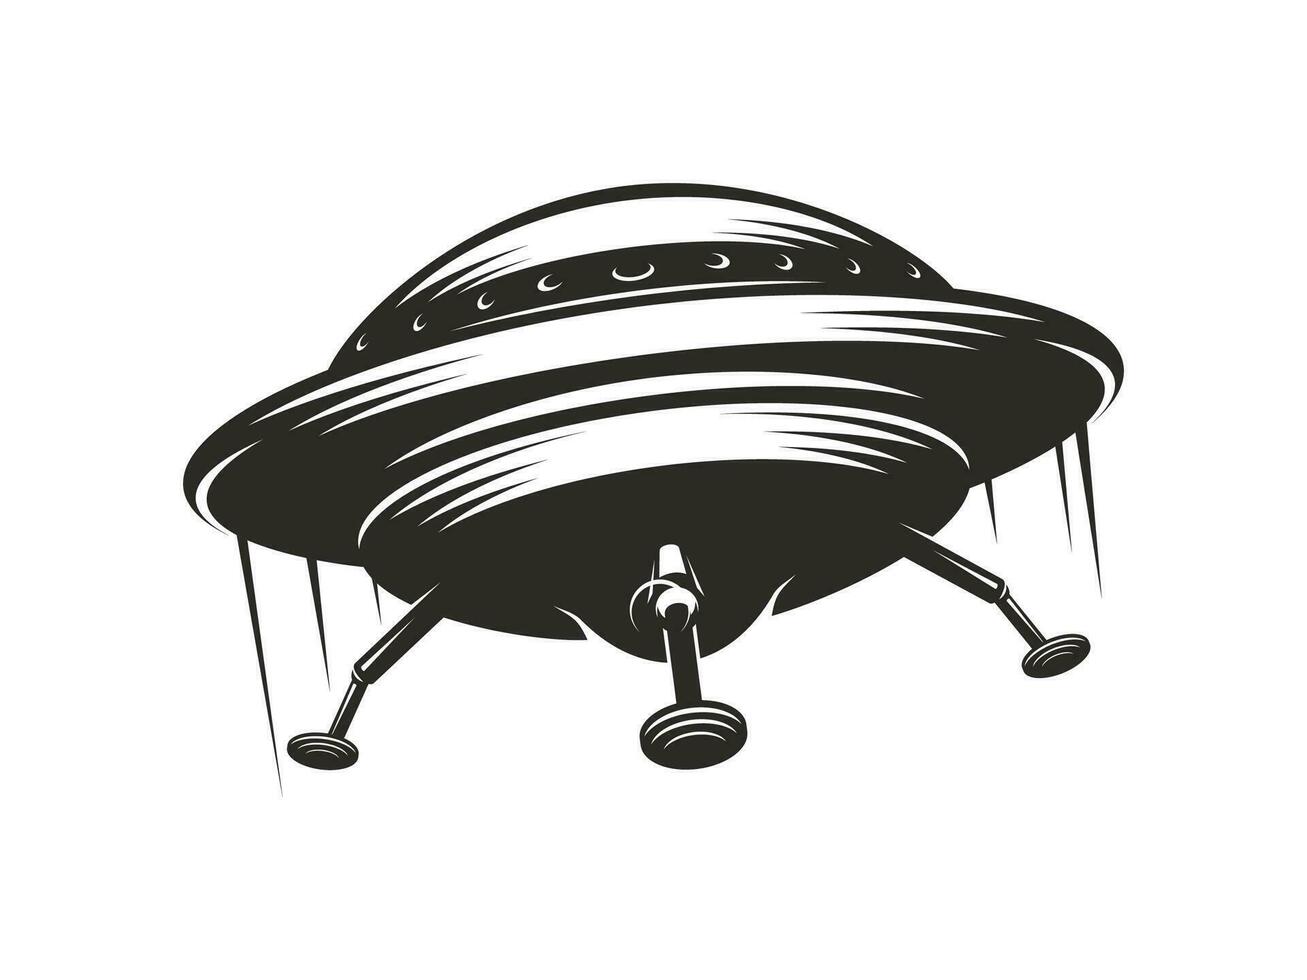 UFO icon, flying saucer with trails, spaceship vector